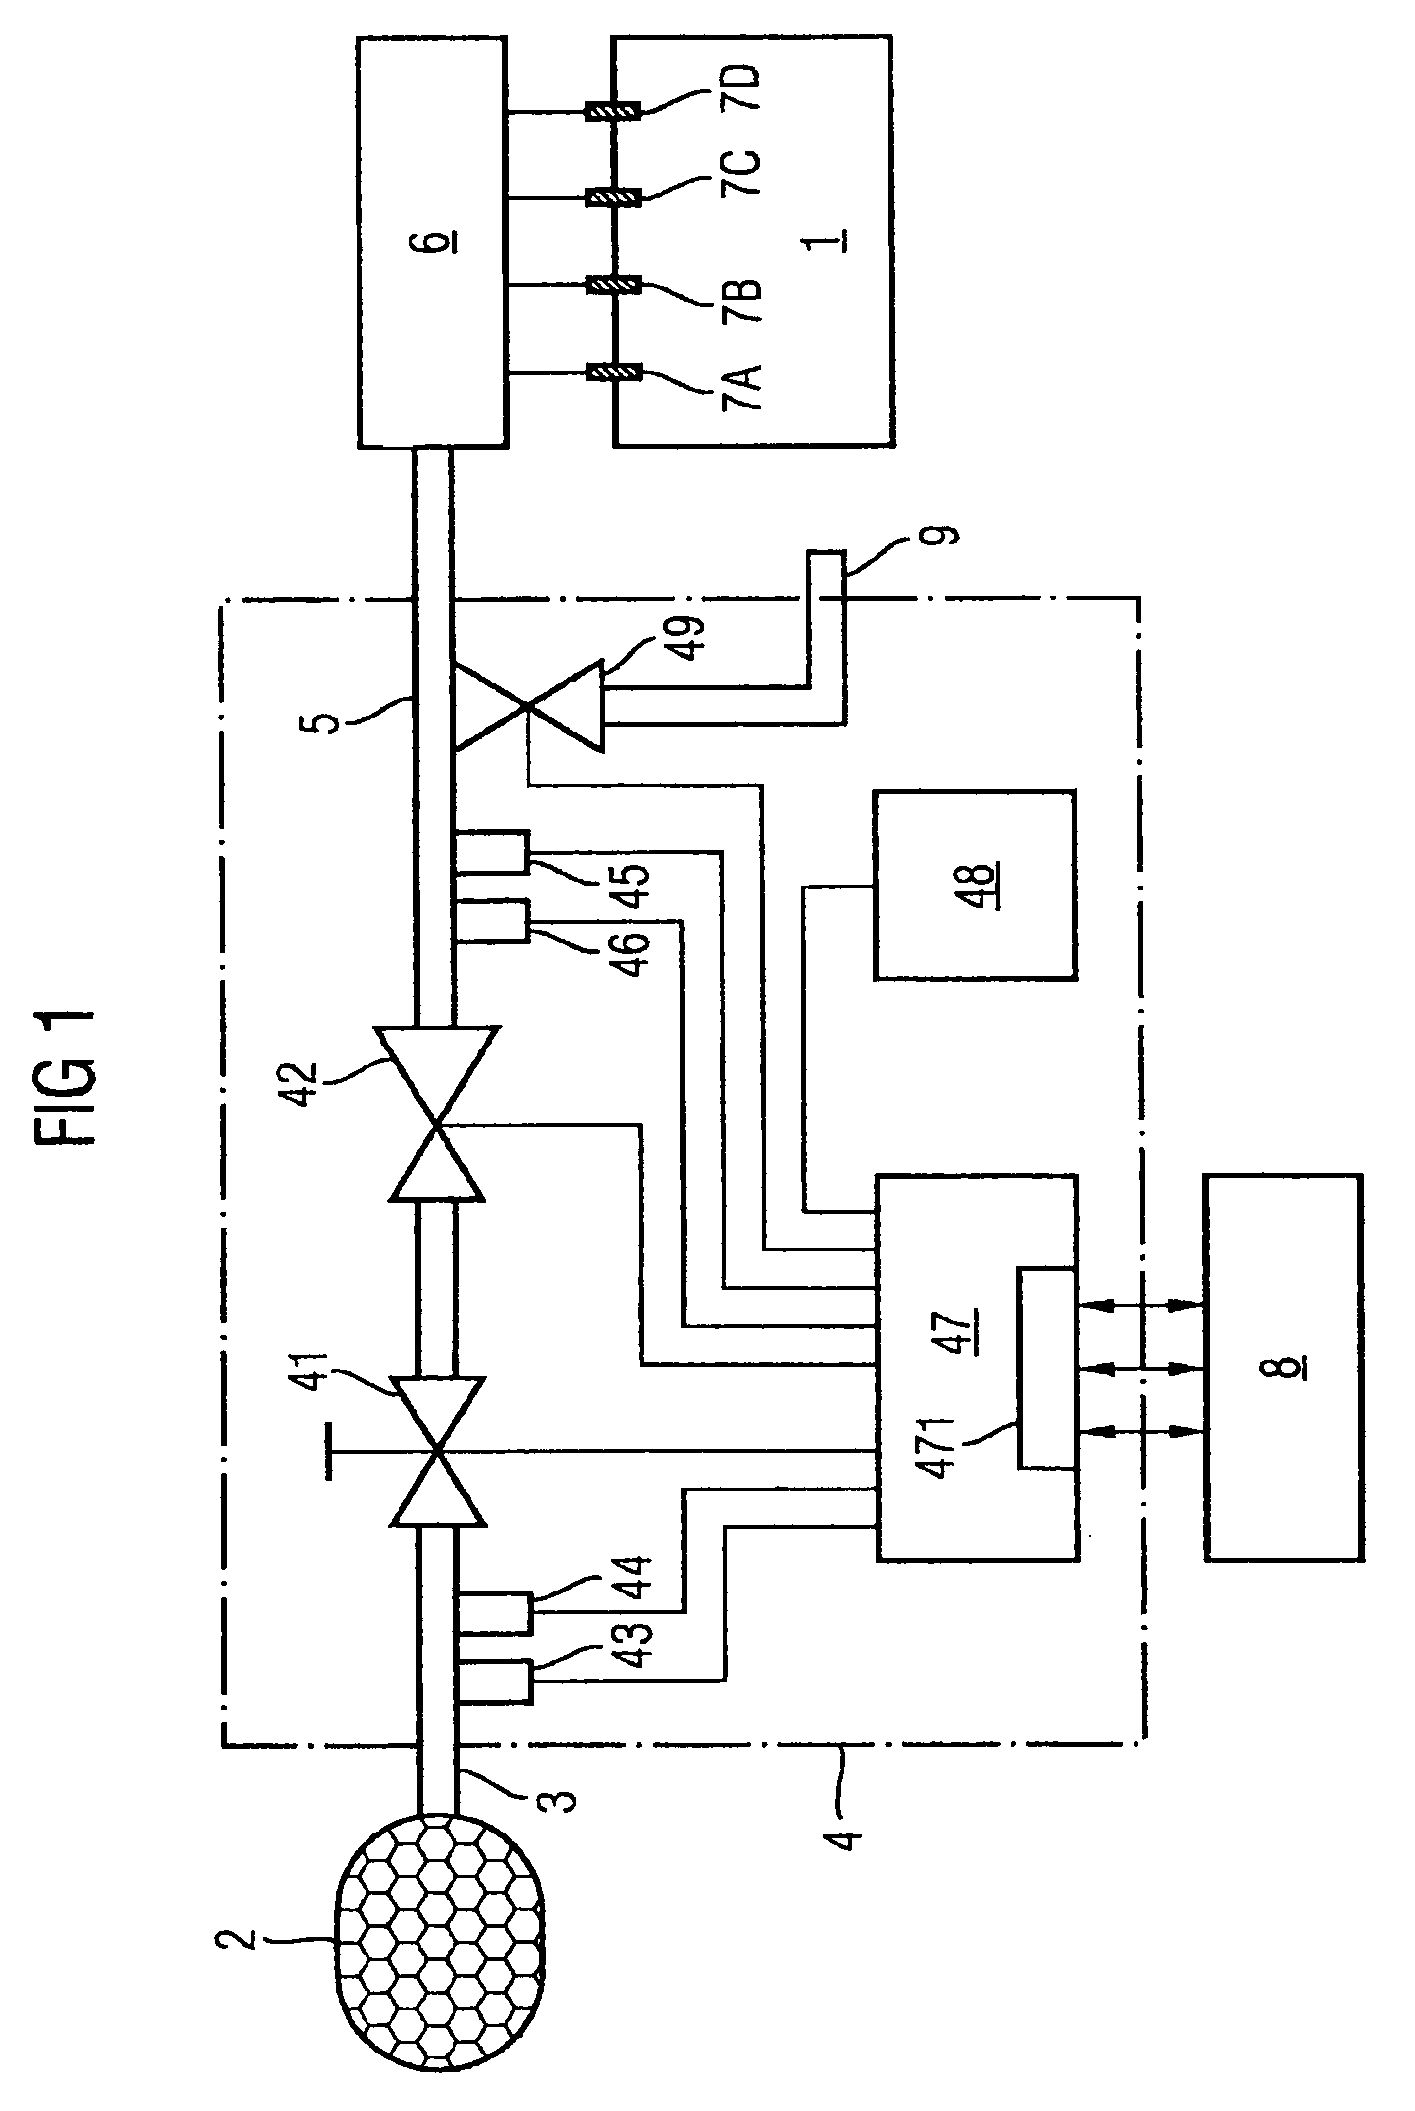 Operating method and device for a gas-operated internal combustion engine